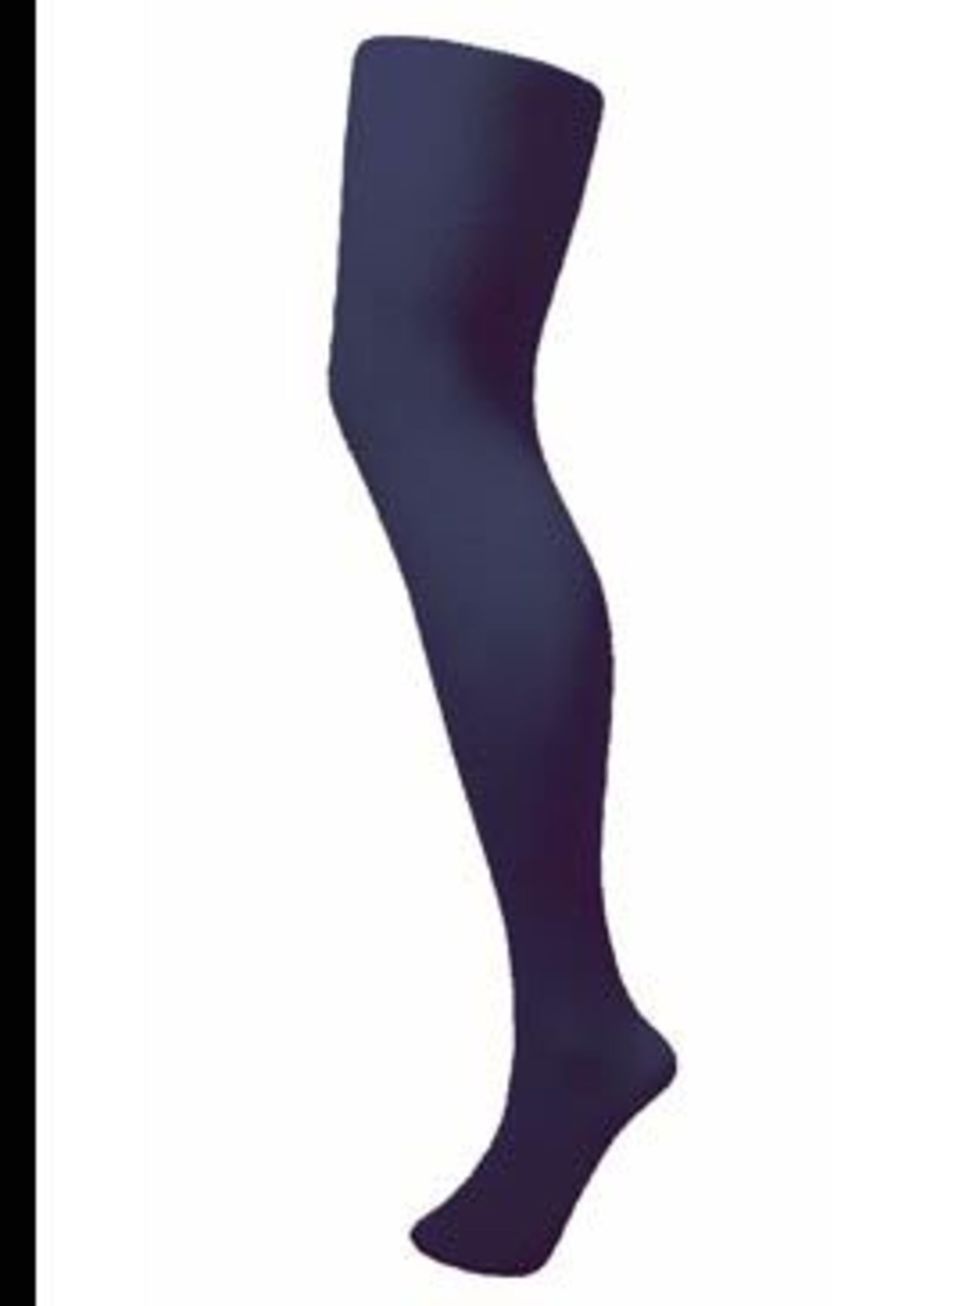 <p>50 Denier Navy tights, £4.99, by Pamela Mann at <a href="http://www.tightsplease.co.uk/index.php?page%5Bproduct%5D=753">tightsplease.co.uk</a></p>